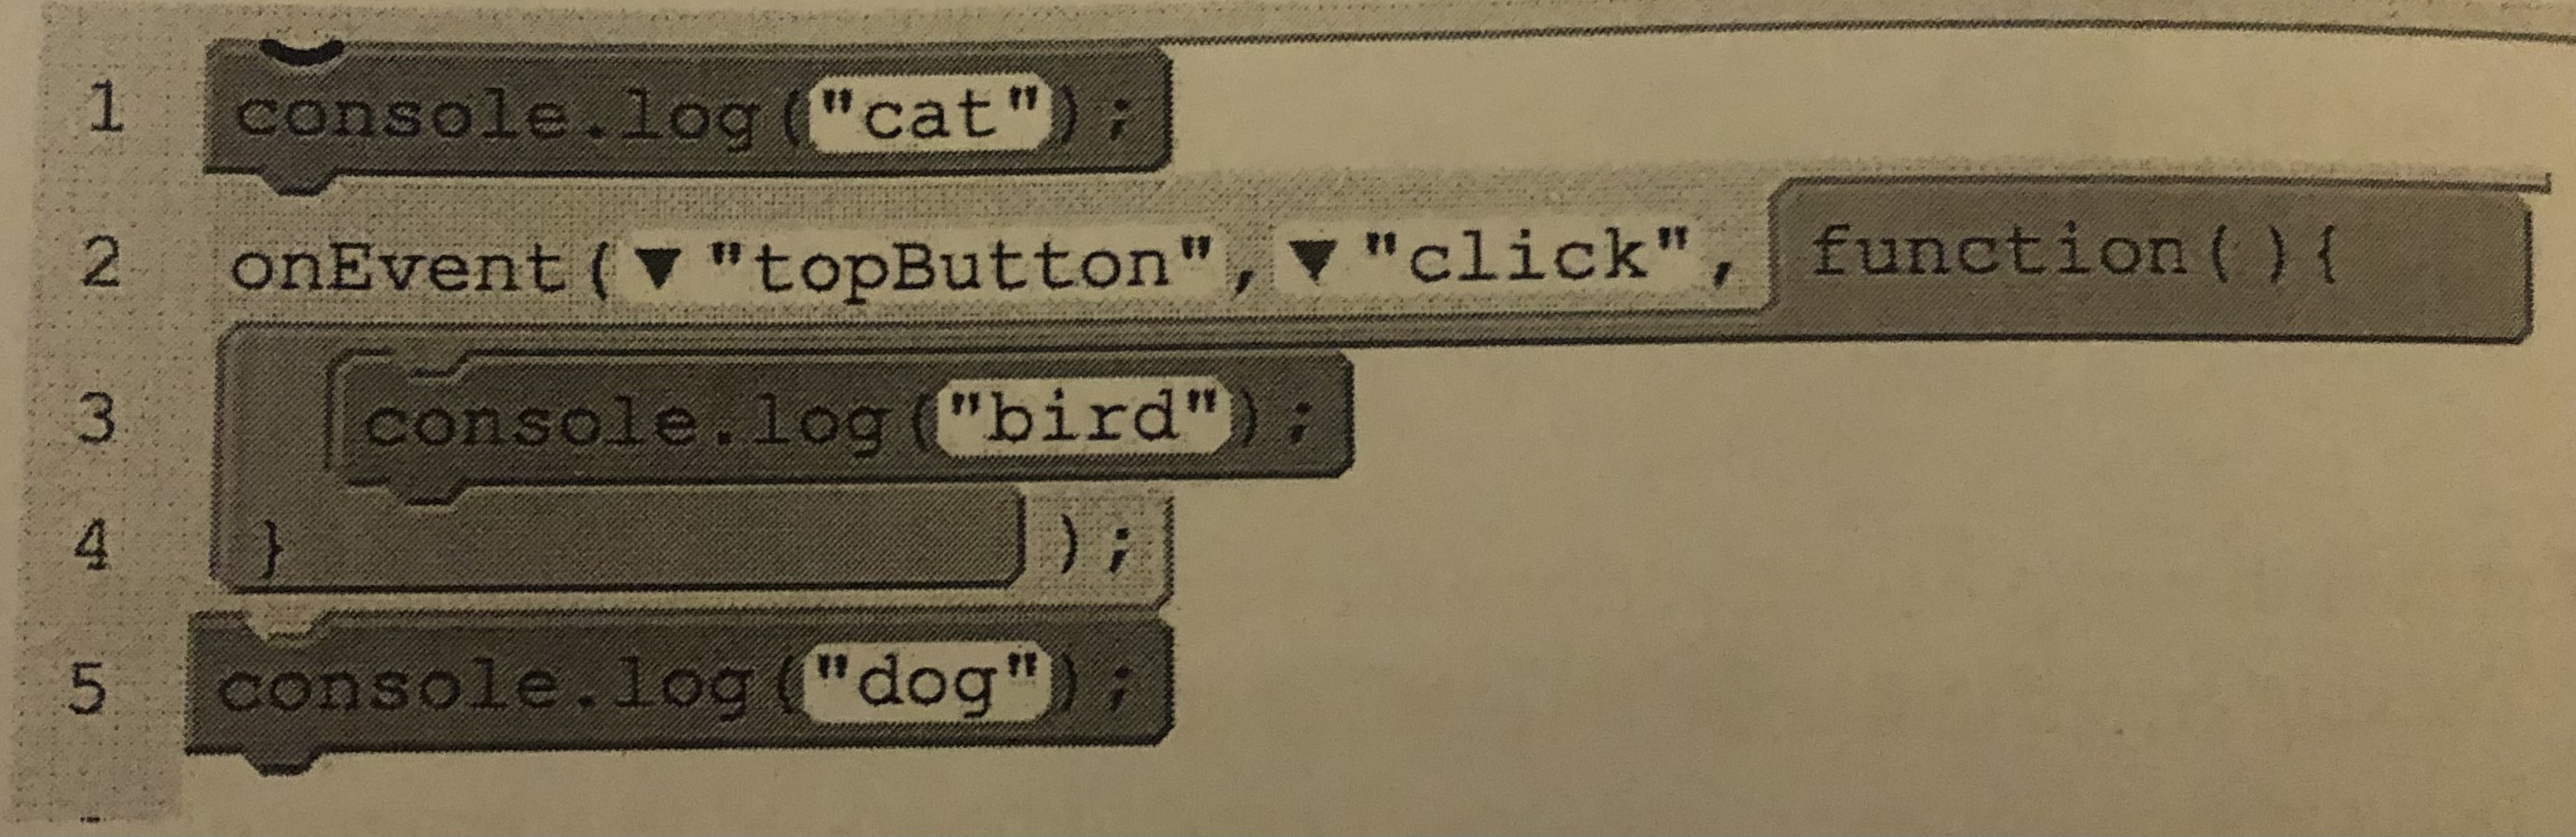 <p>The following program is run. Then the user clicks the “topButton” button once. What will be displayed in the console?</p><p>A.) cat bird dog</p><p>B.) dog cat bird</p><p>C.) cat dog bird</p><p>D.) bird cat dog</p>